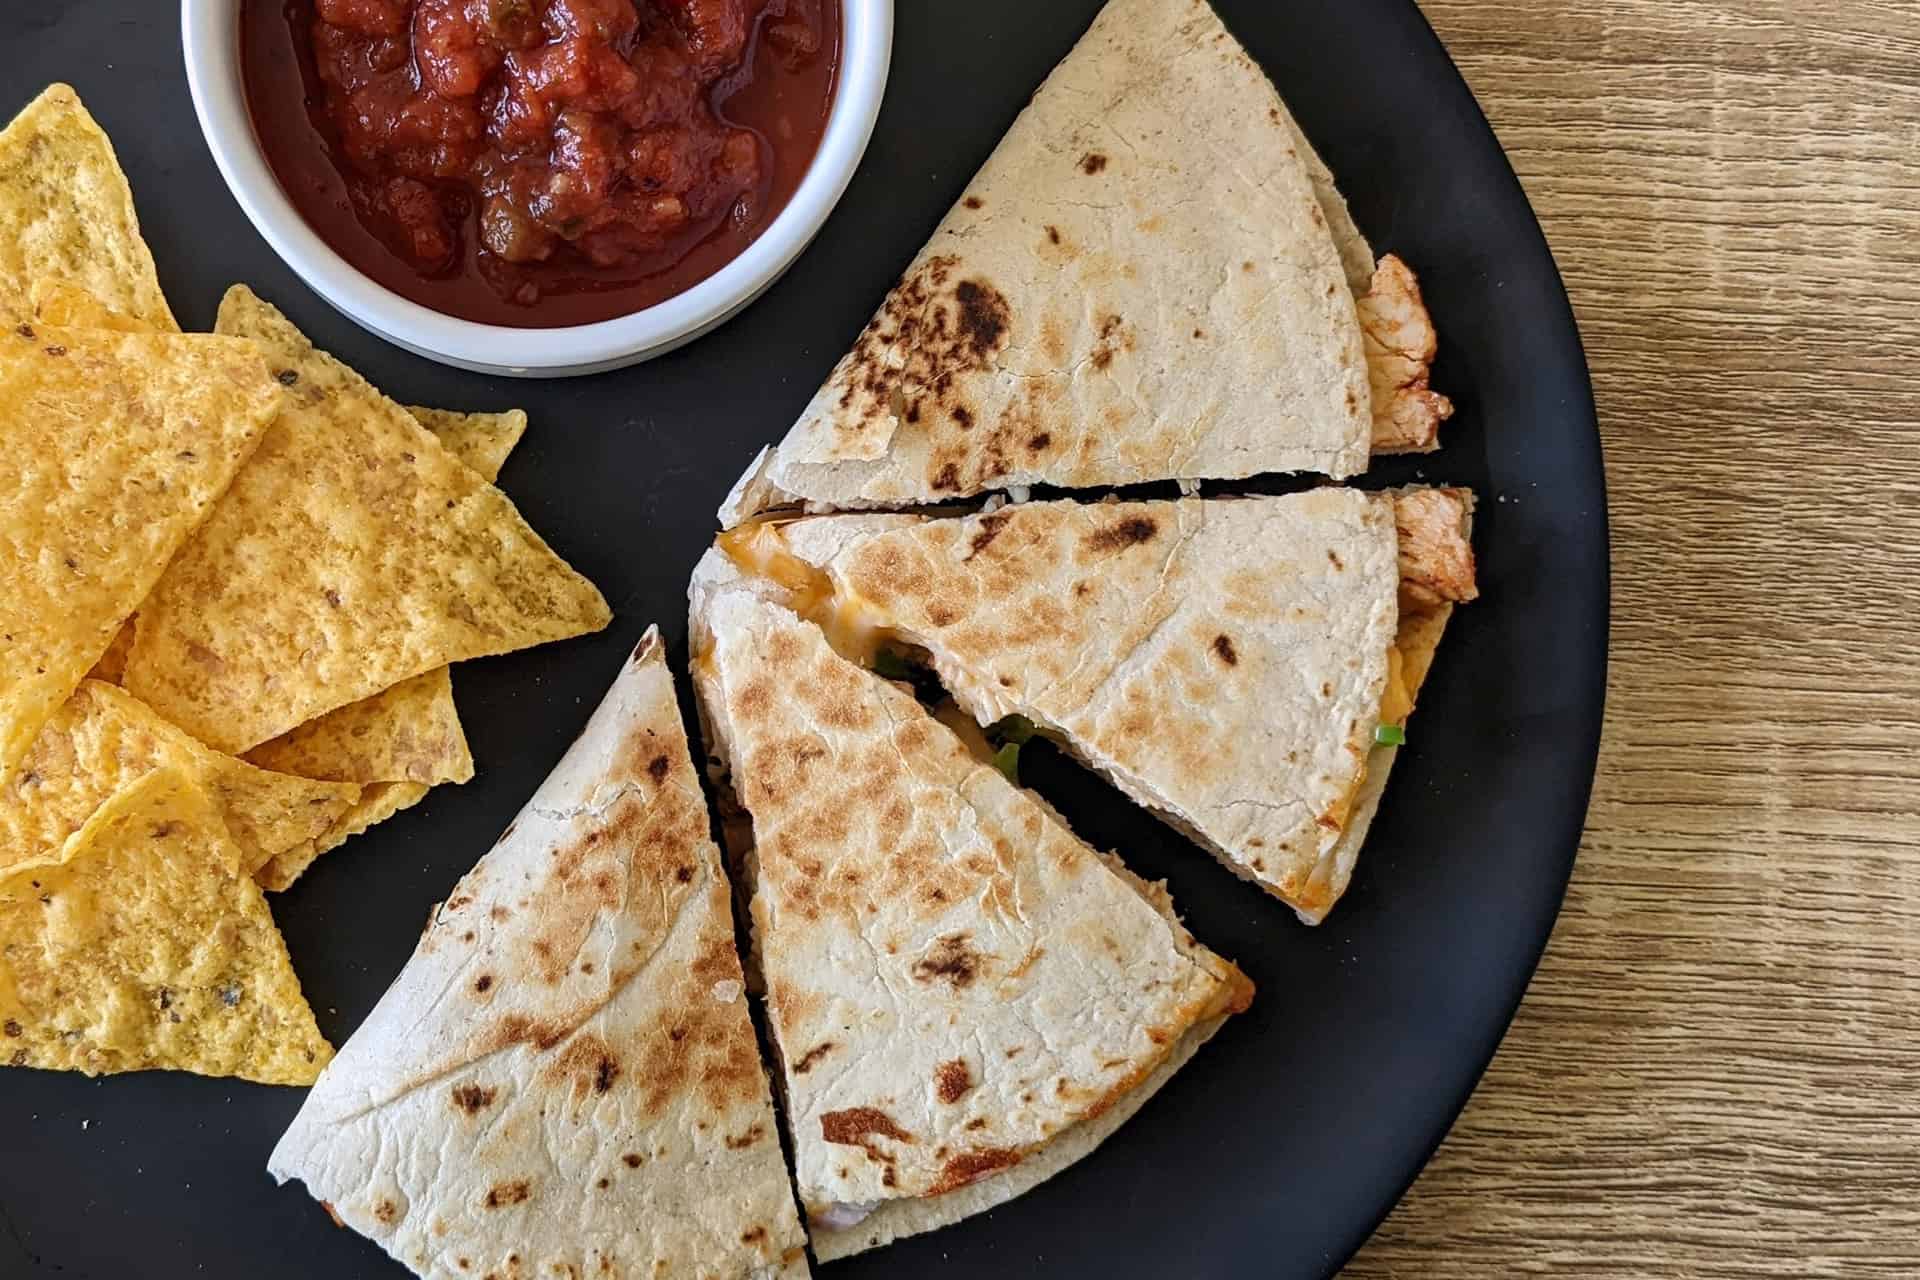 A chicken and cheese quesadilla on a plate with chips and salsa